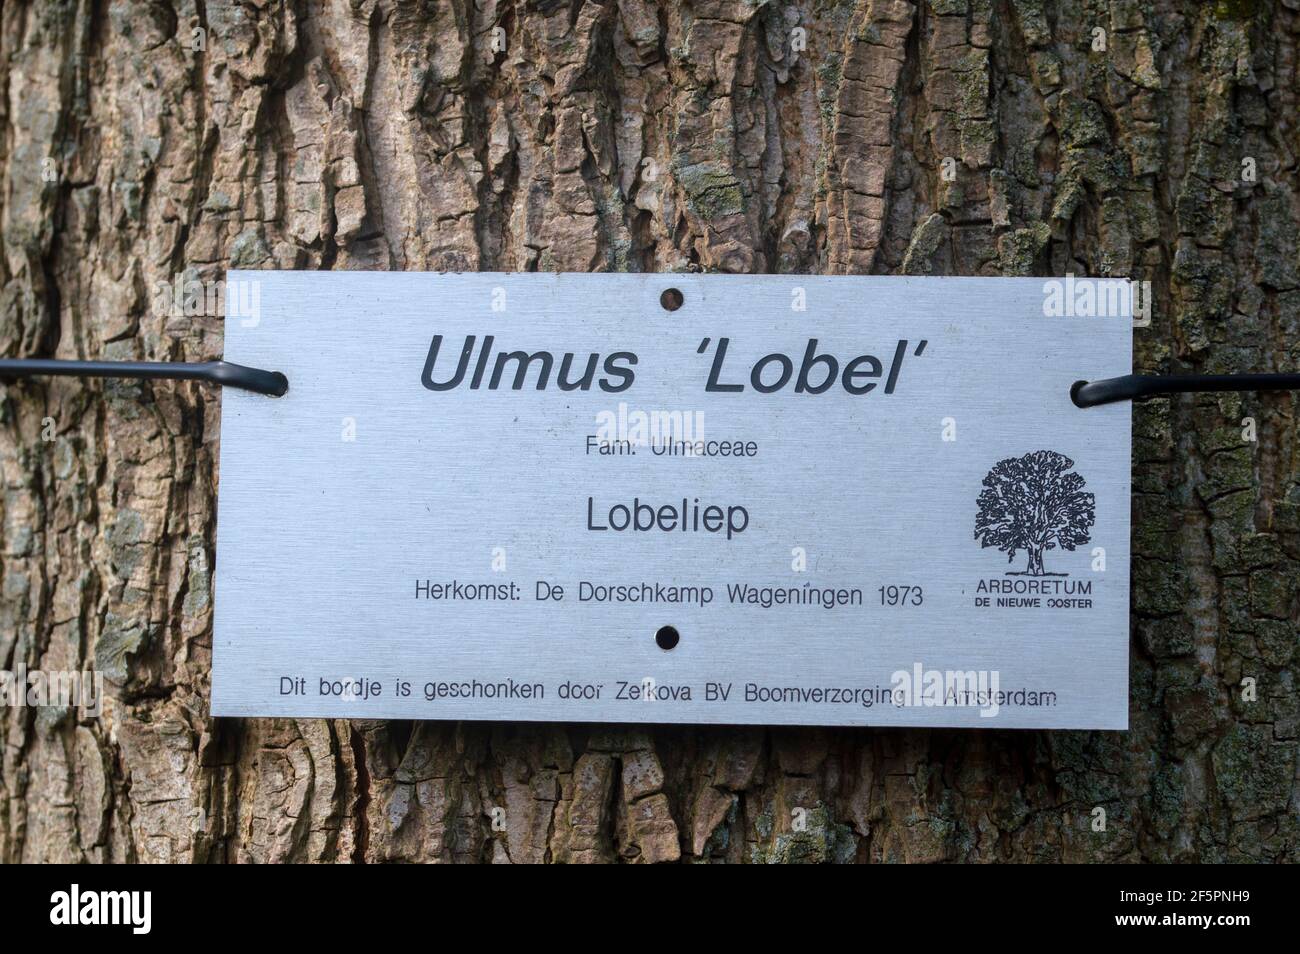 Sign Ulmus Lobel Tree At De Nieuwe Ooster At Amsterdam The Netherlands 26-3-2021 Stock Photo